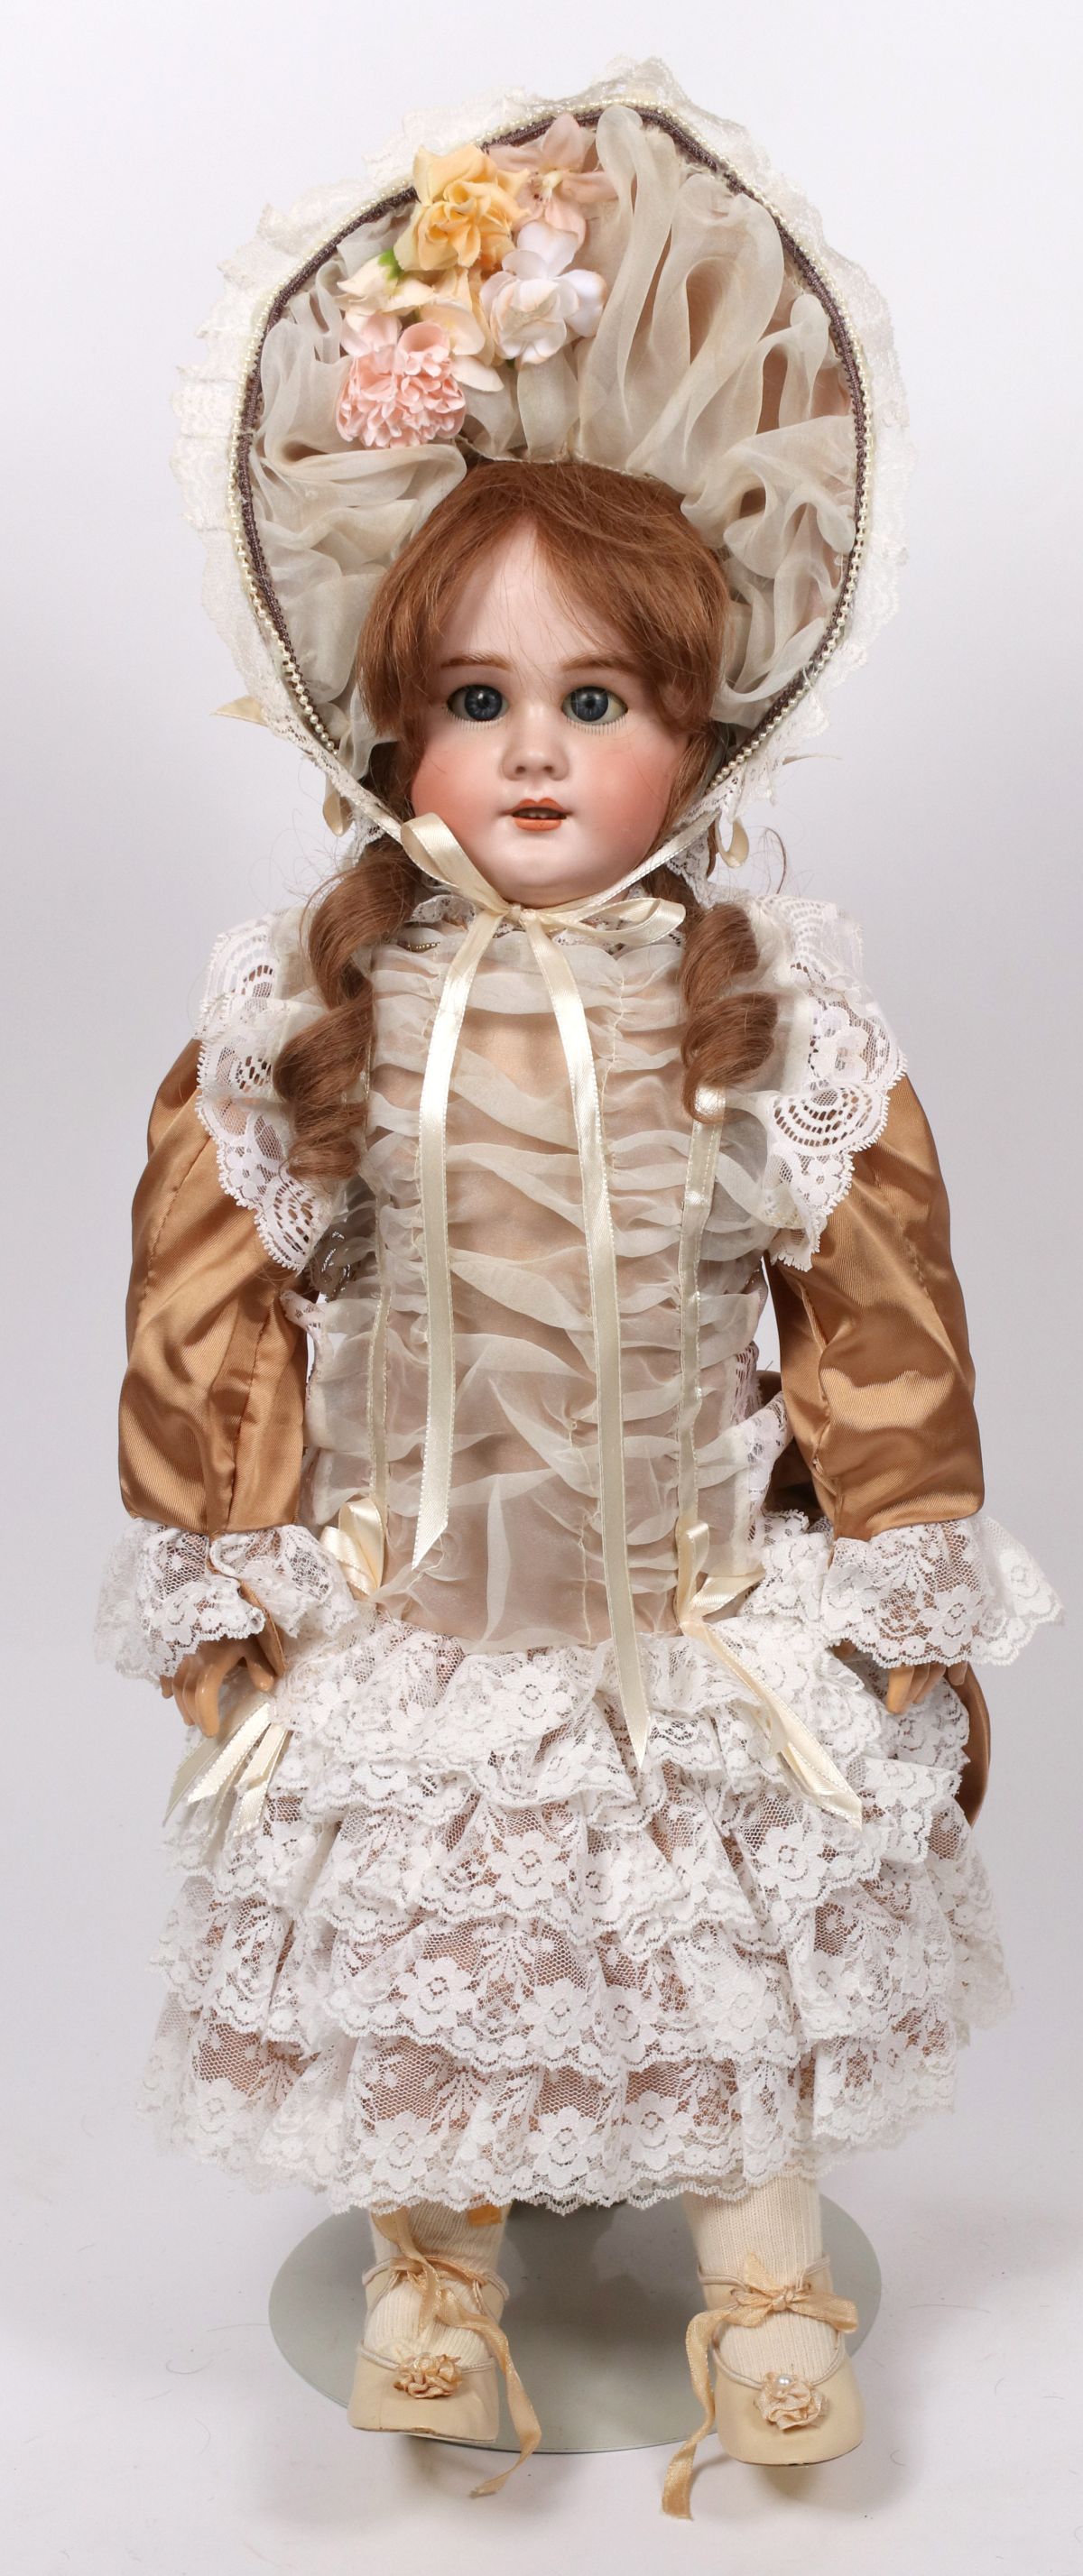 TETE JUMEAU 11 FRENCH BISQUE SOCKET HEAD DOLL